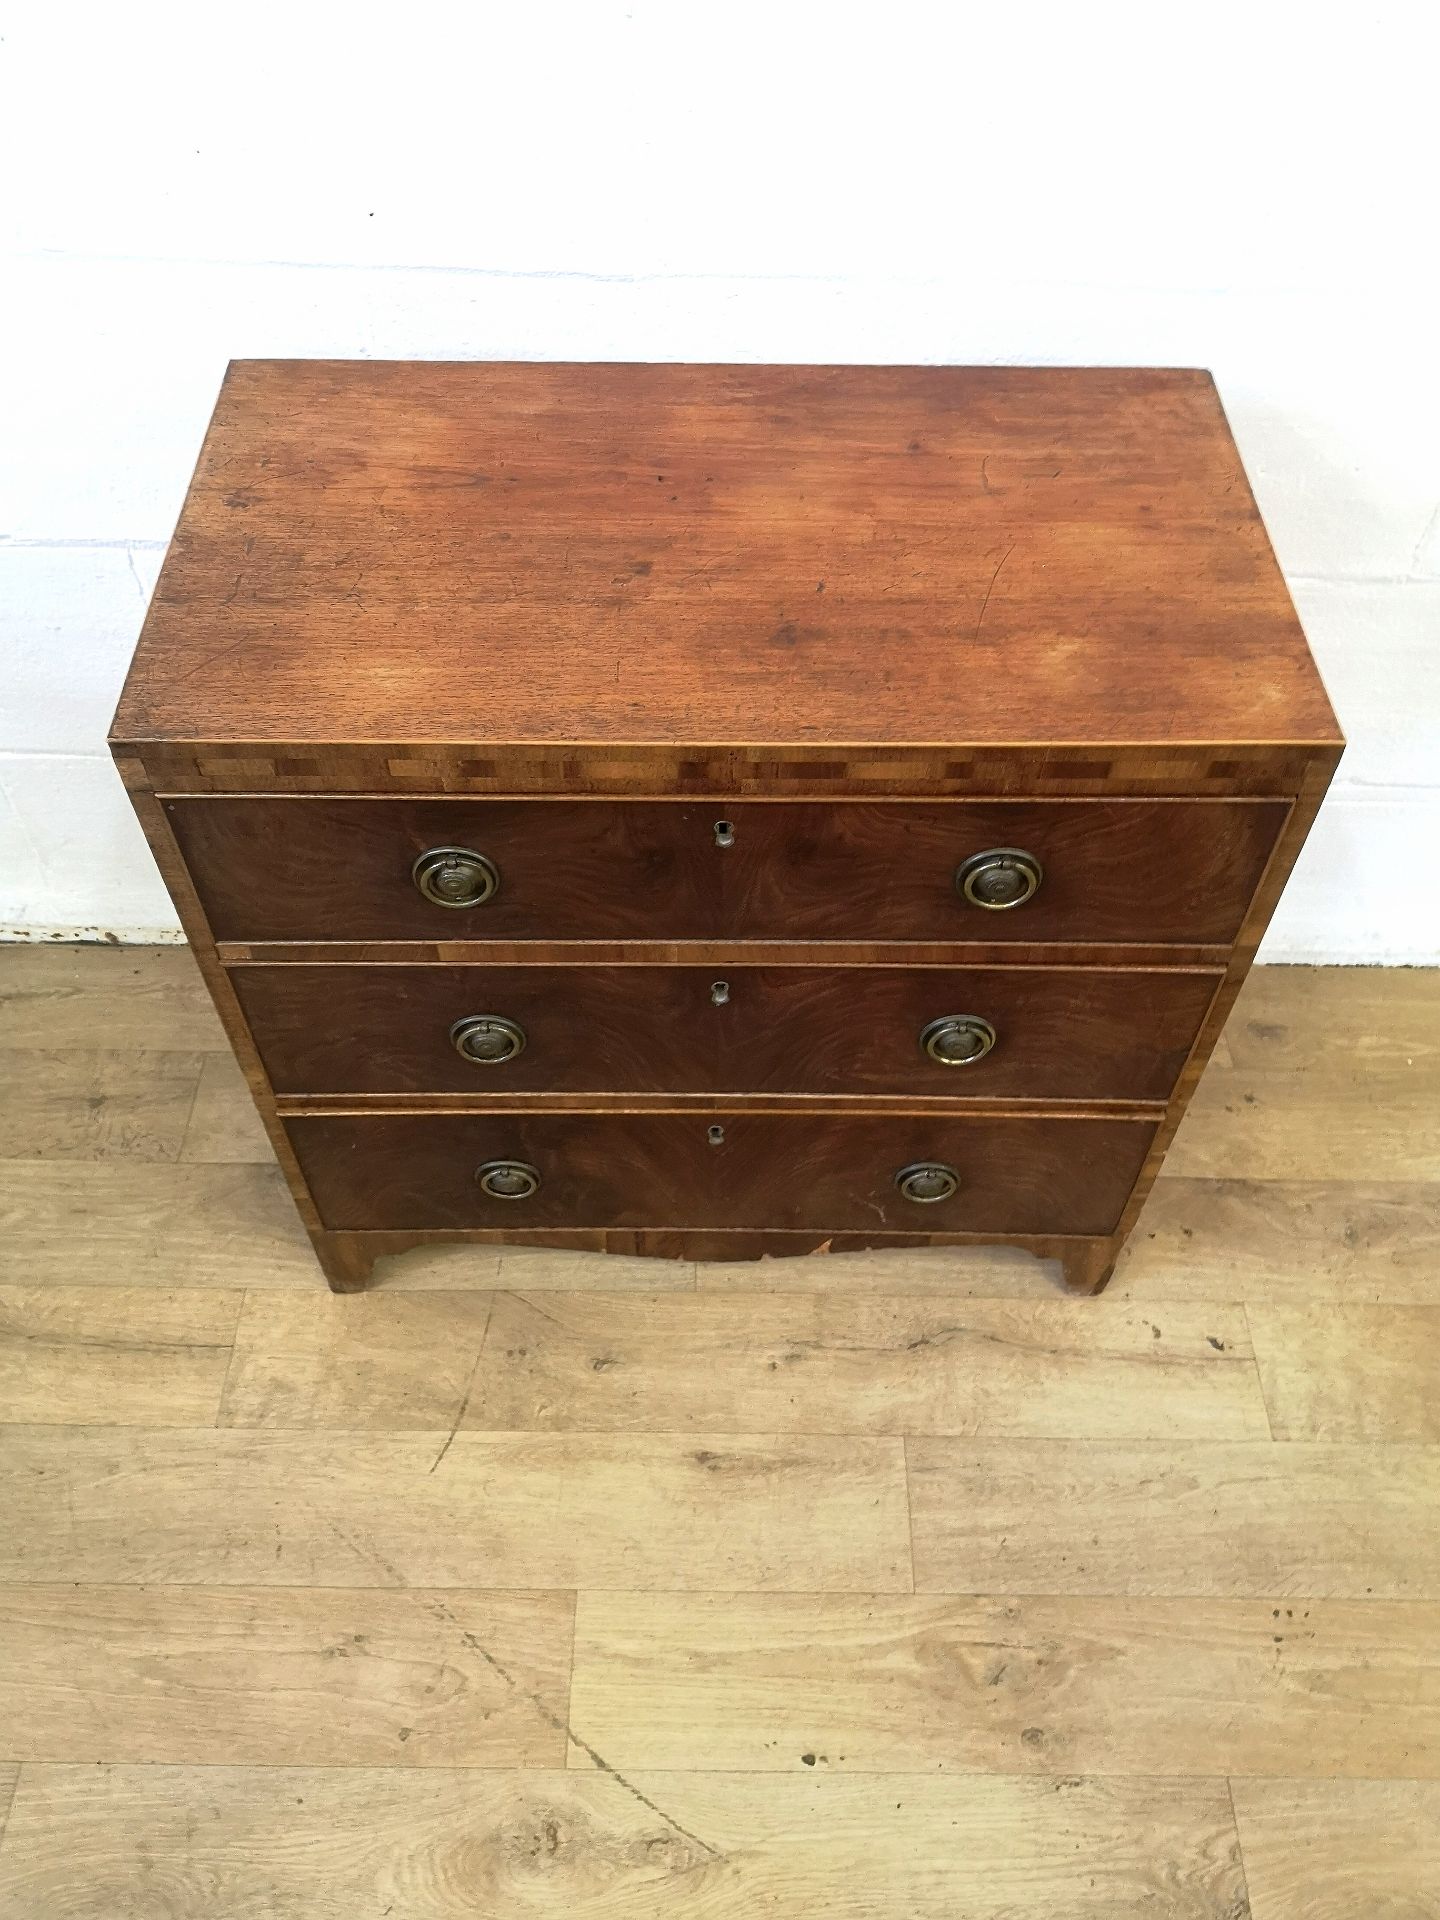 Victorian mahogany chest of drawers - Image 6 of 6